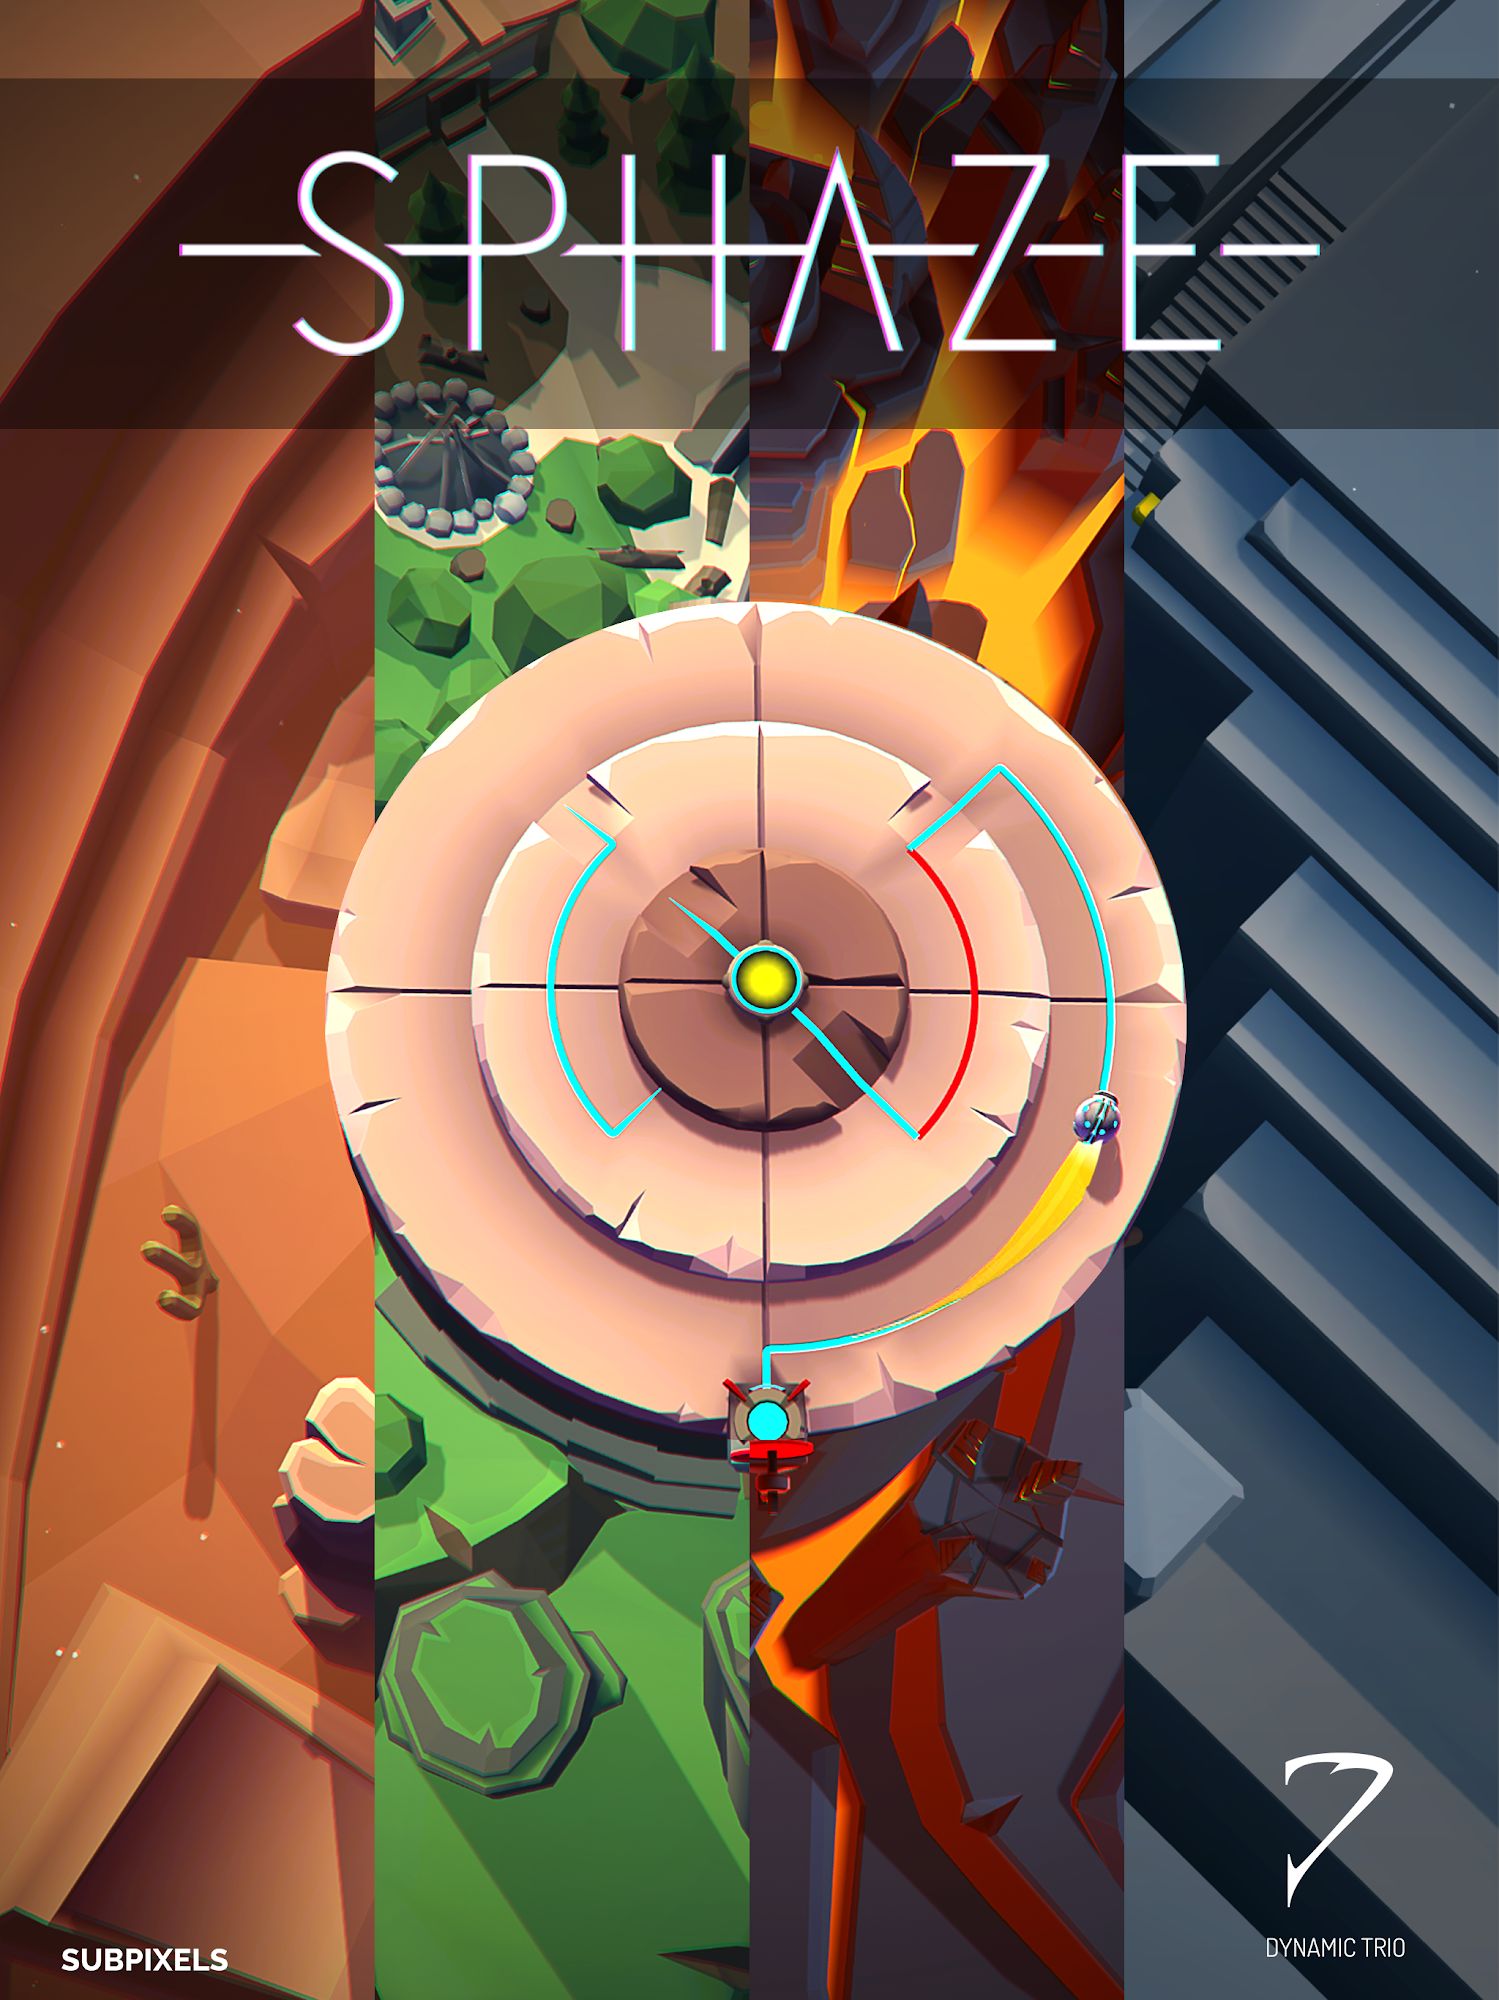 SPHAZE for Android